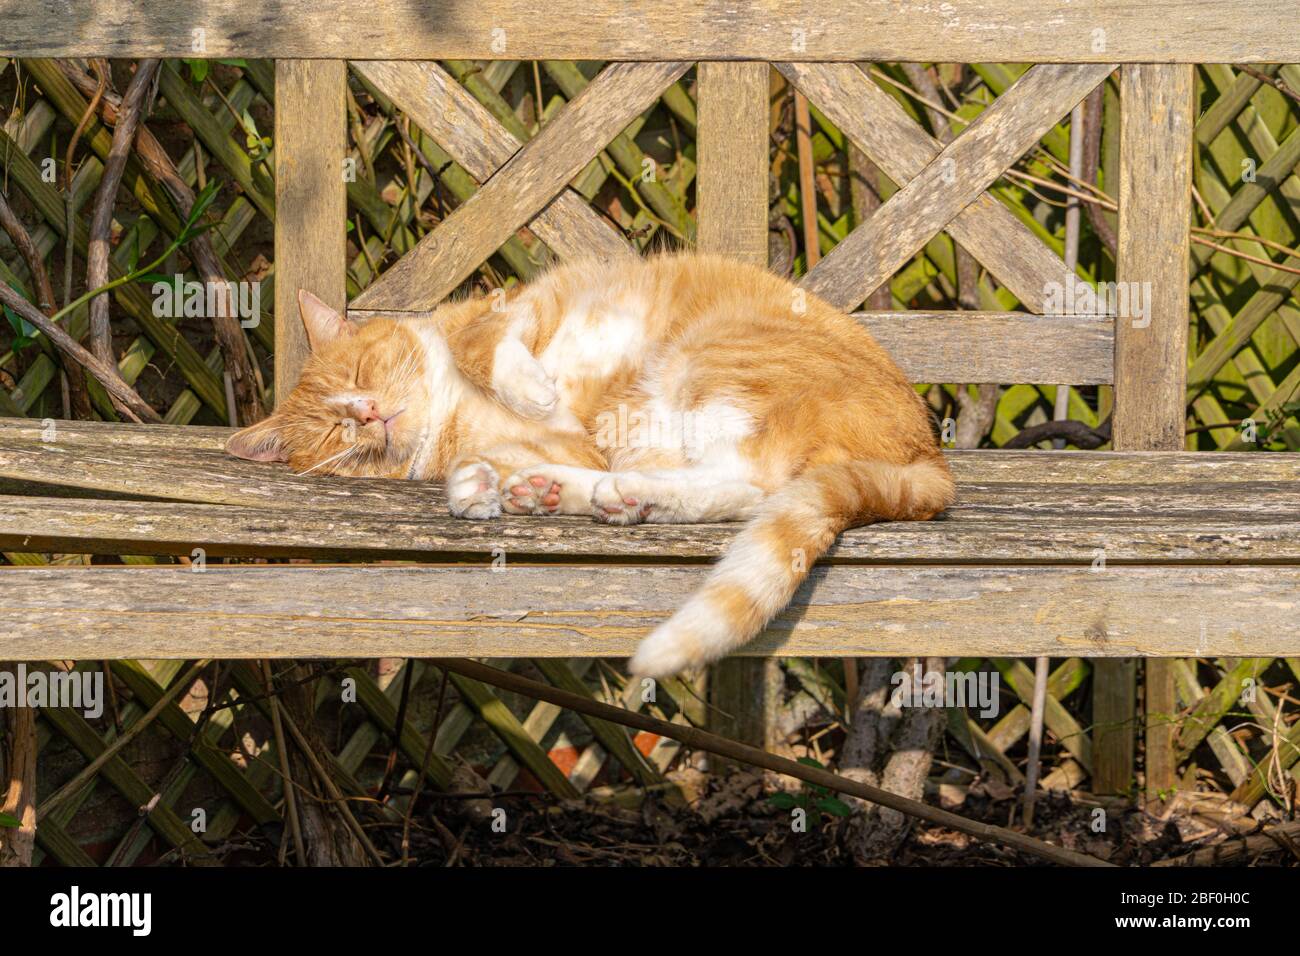 Large Ginger Male Tomcat Cat Tabby Orange and white striped asleep in ...